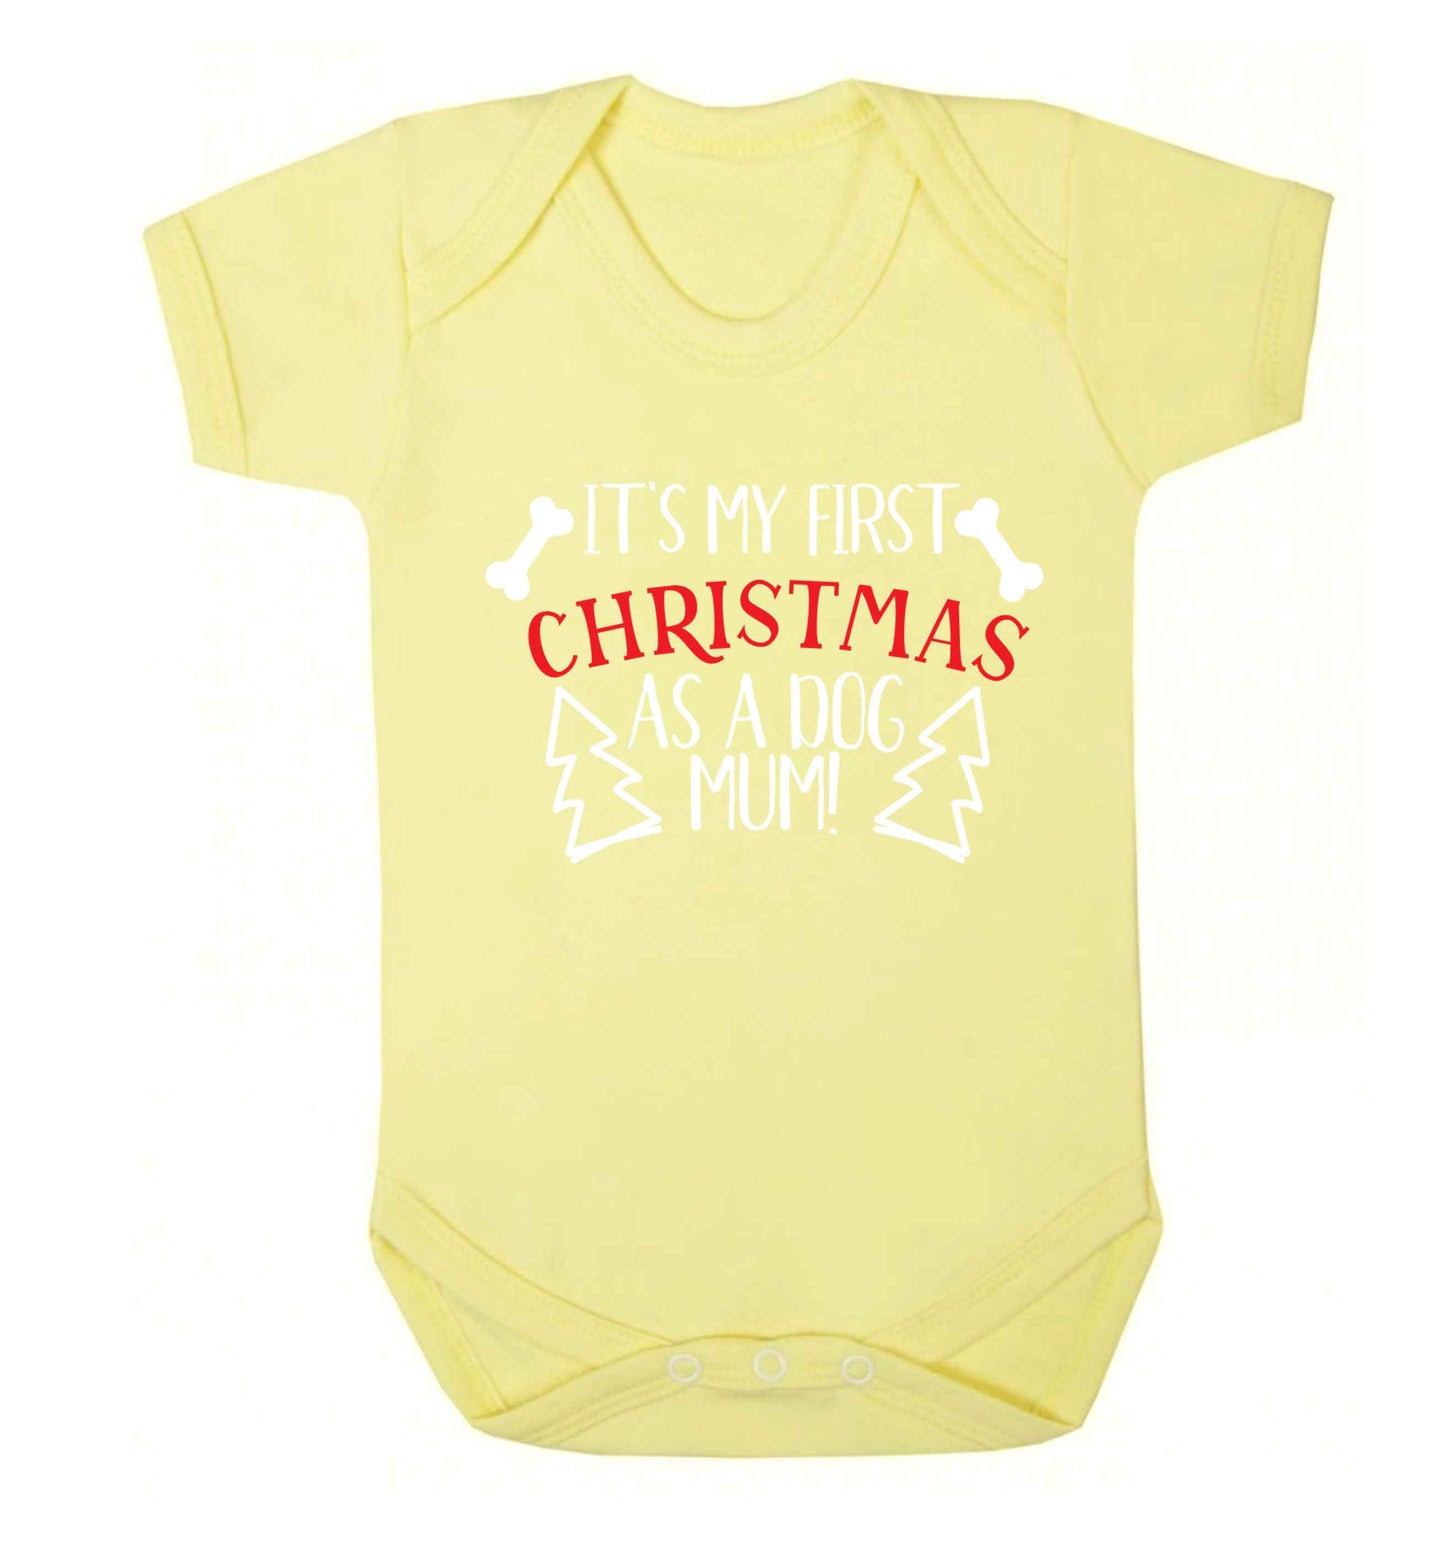 It's my first Christmas as a dog mum! Baby Vest pale yellow 18-24 months